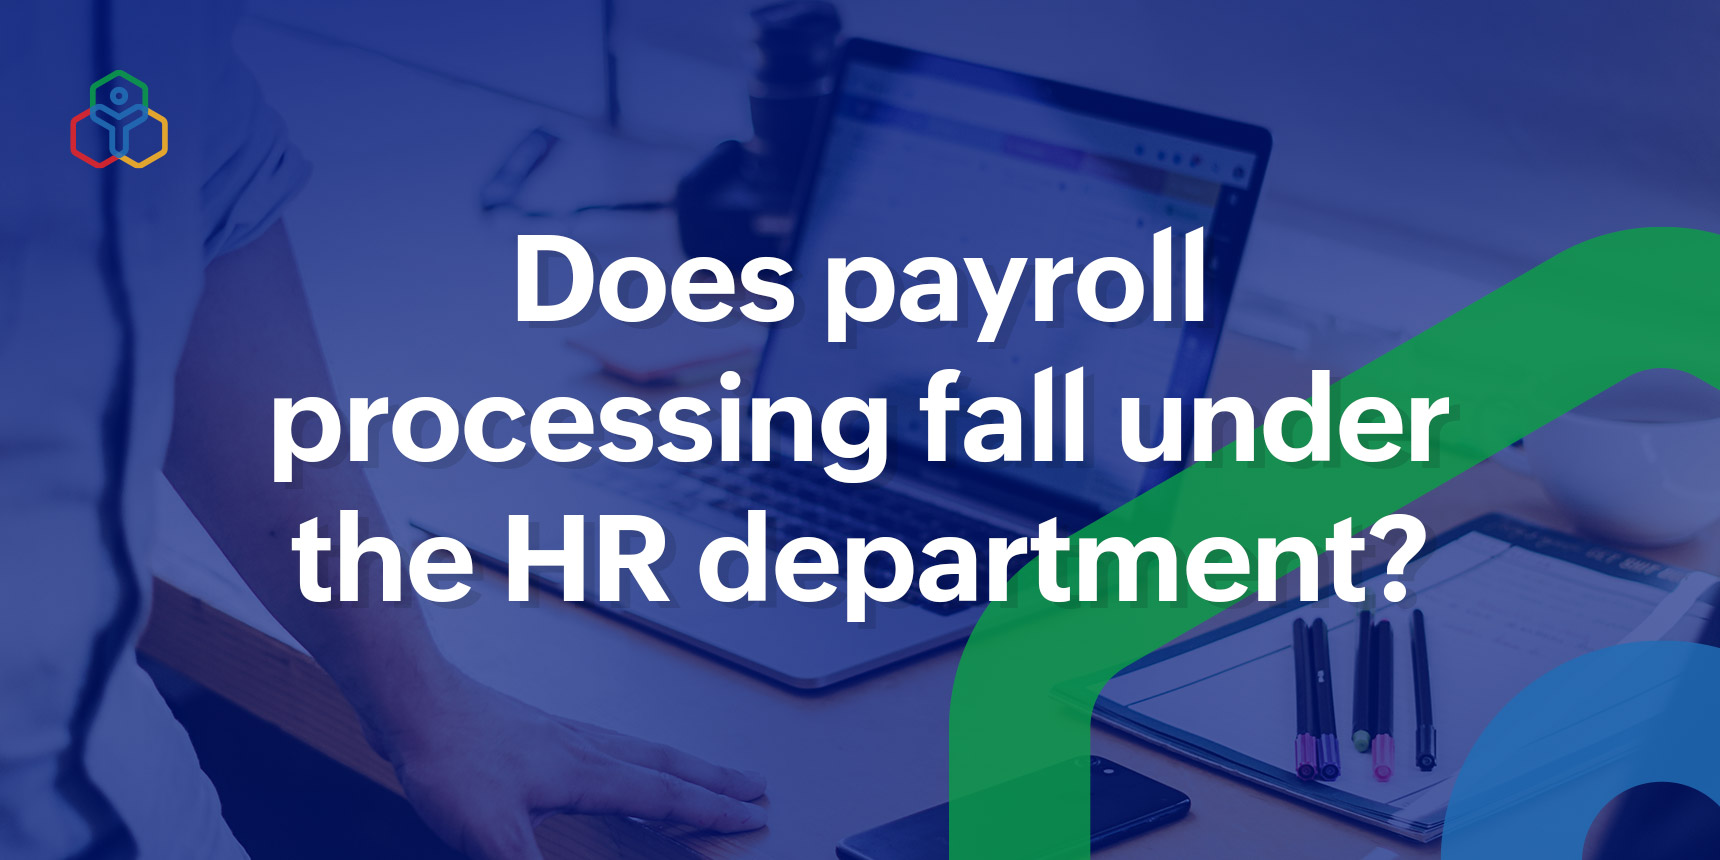 Does payroll processing fall under the HR department?